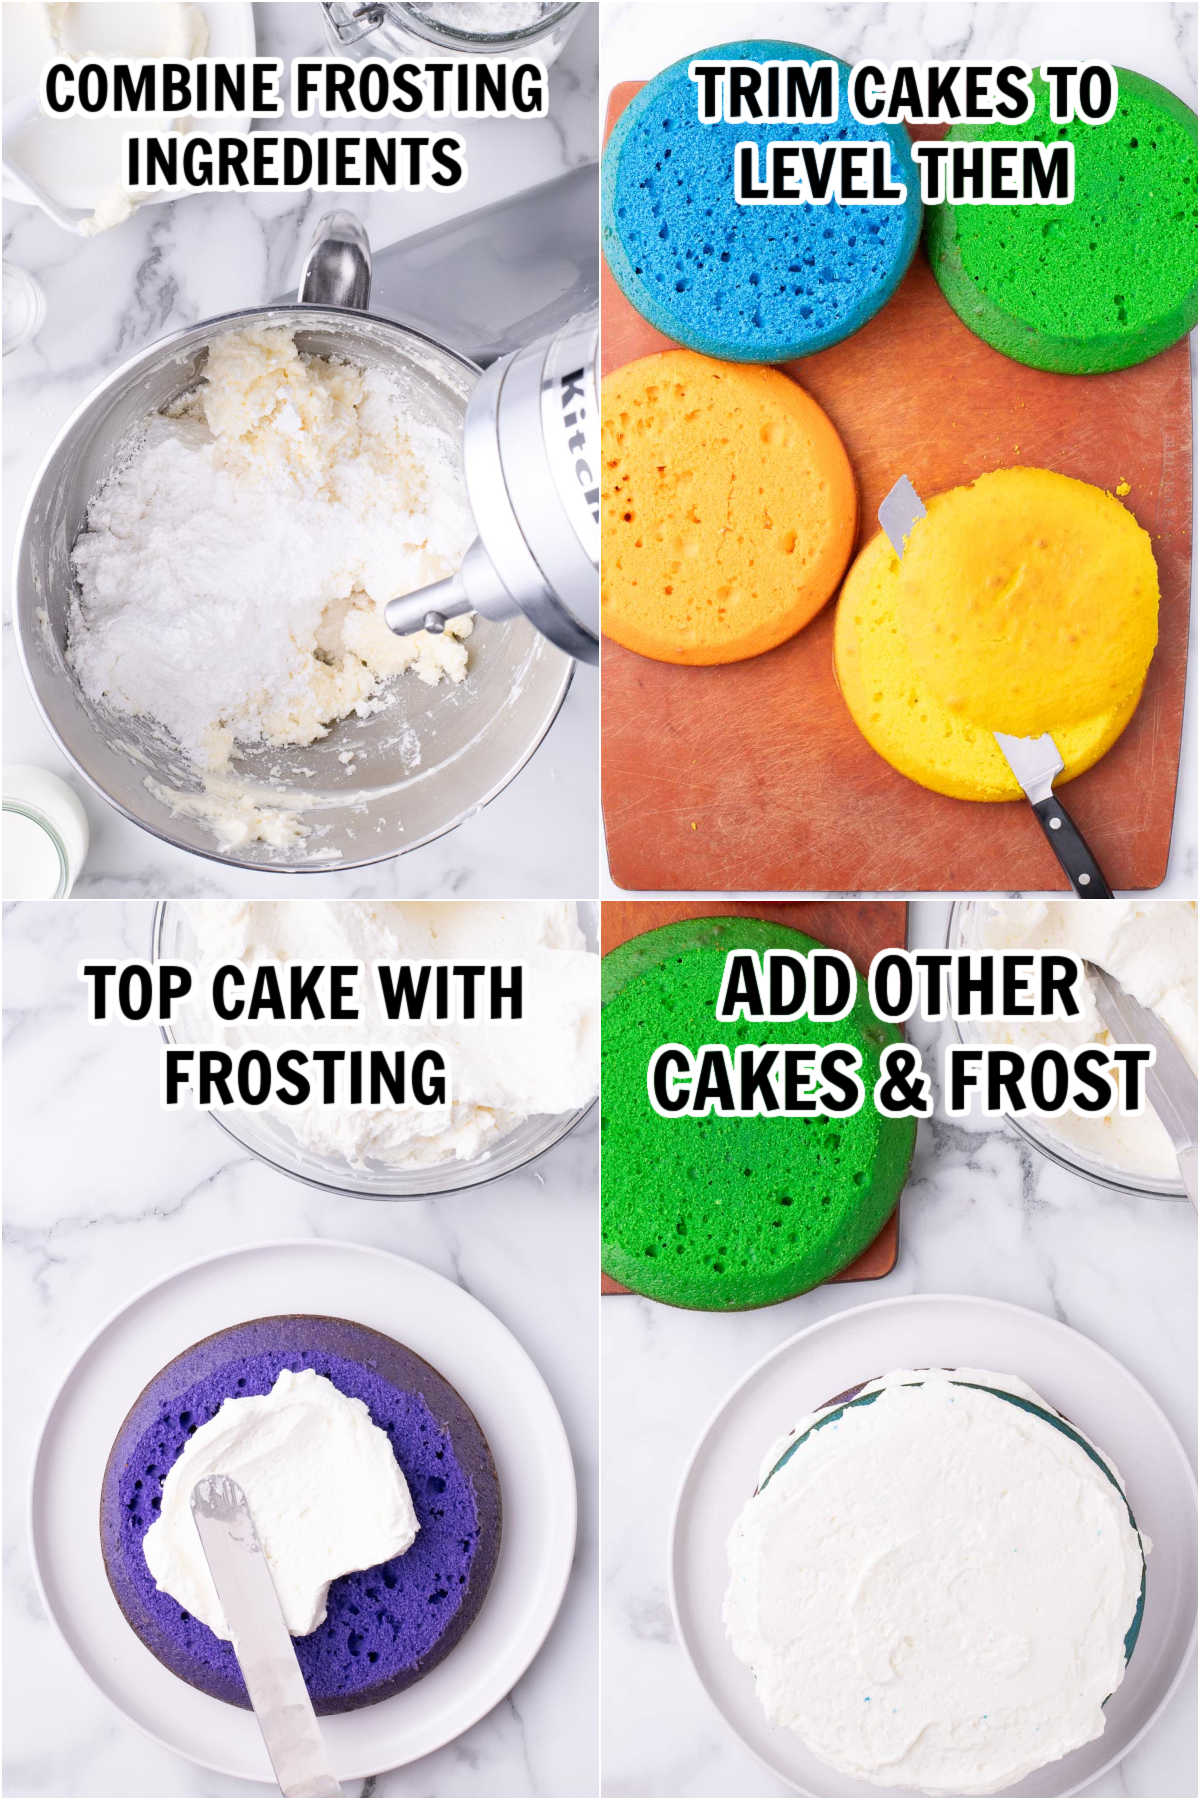 Preparing frosting and cakes to frost